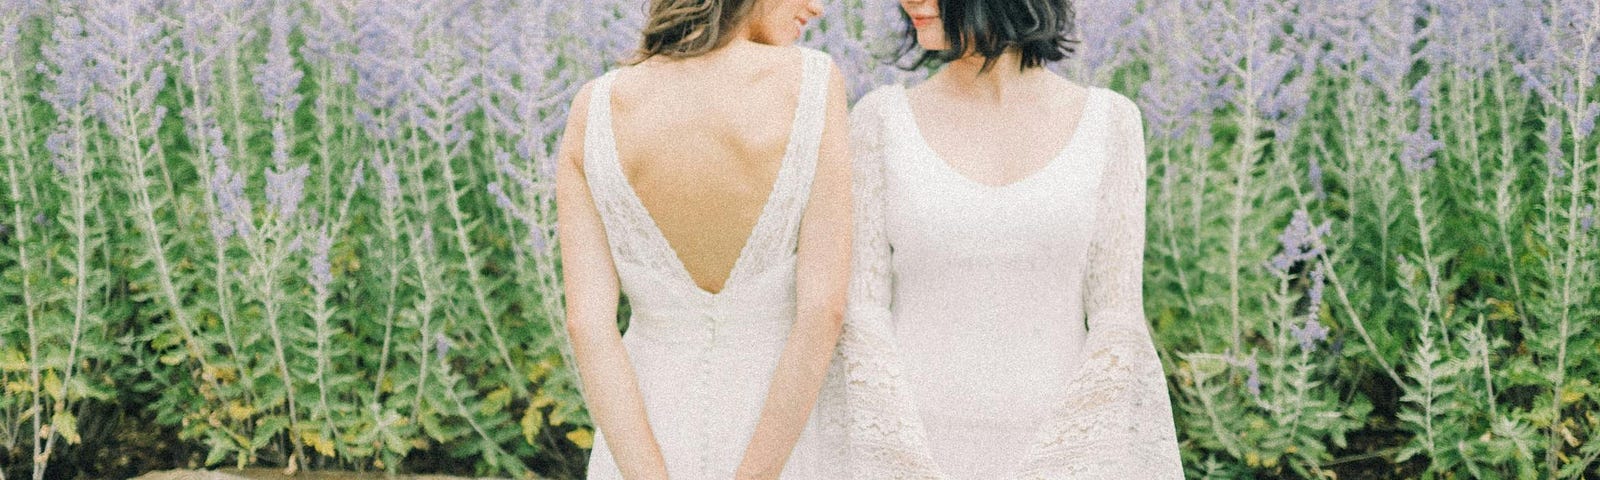 Two women stood outside in wedding dresses. Stood very close. One standing towards the camera, the other standing facing away from the camera. Looking at each other over their shoulders.